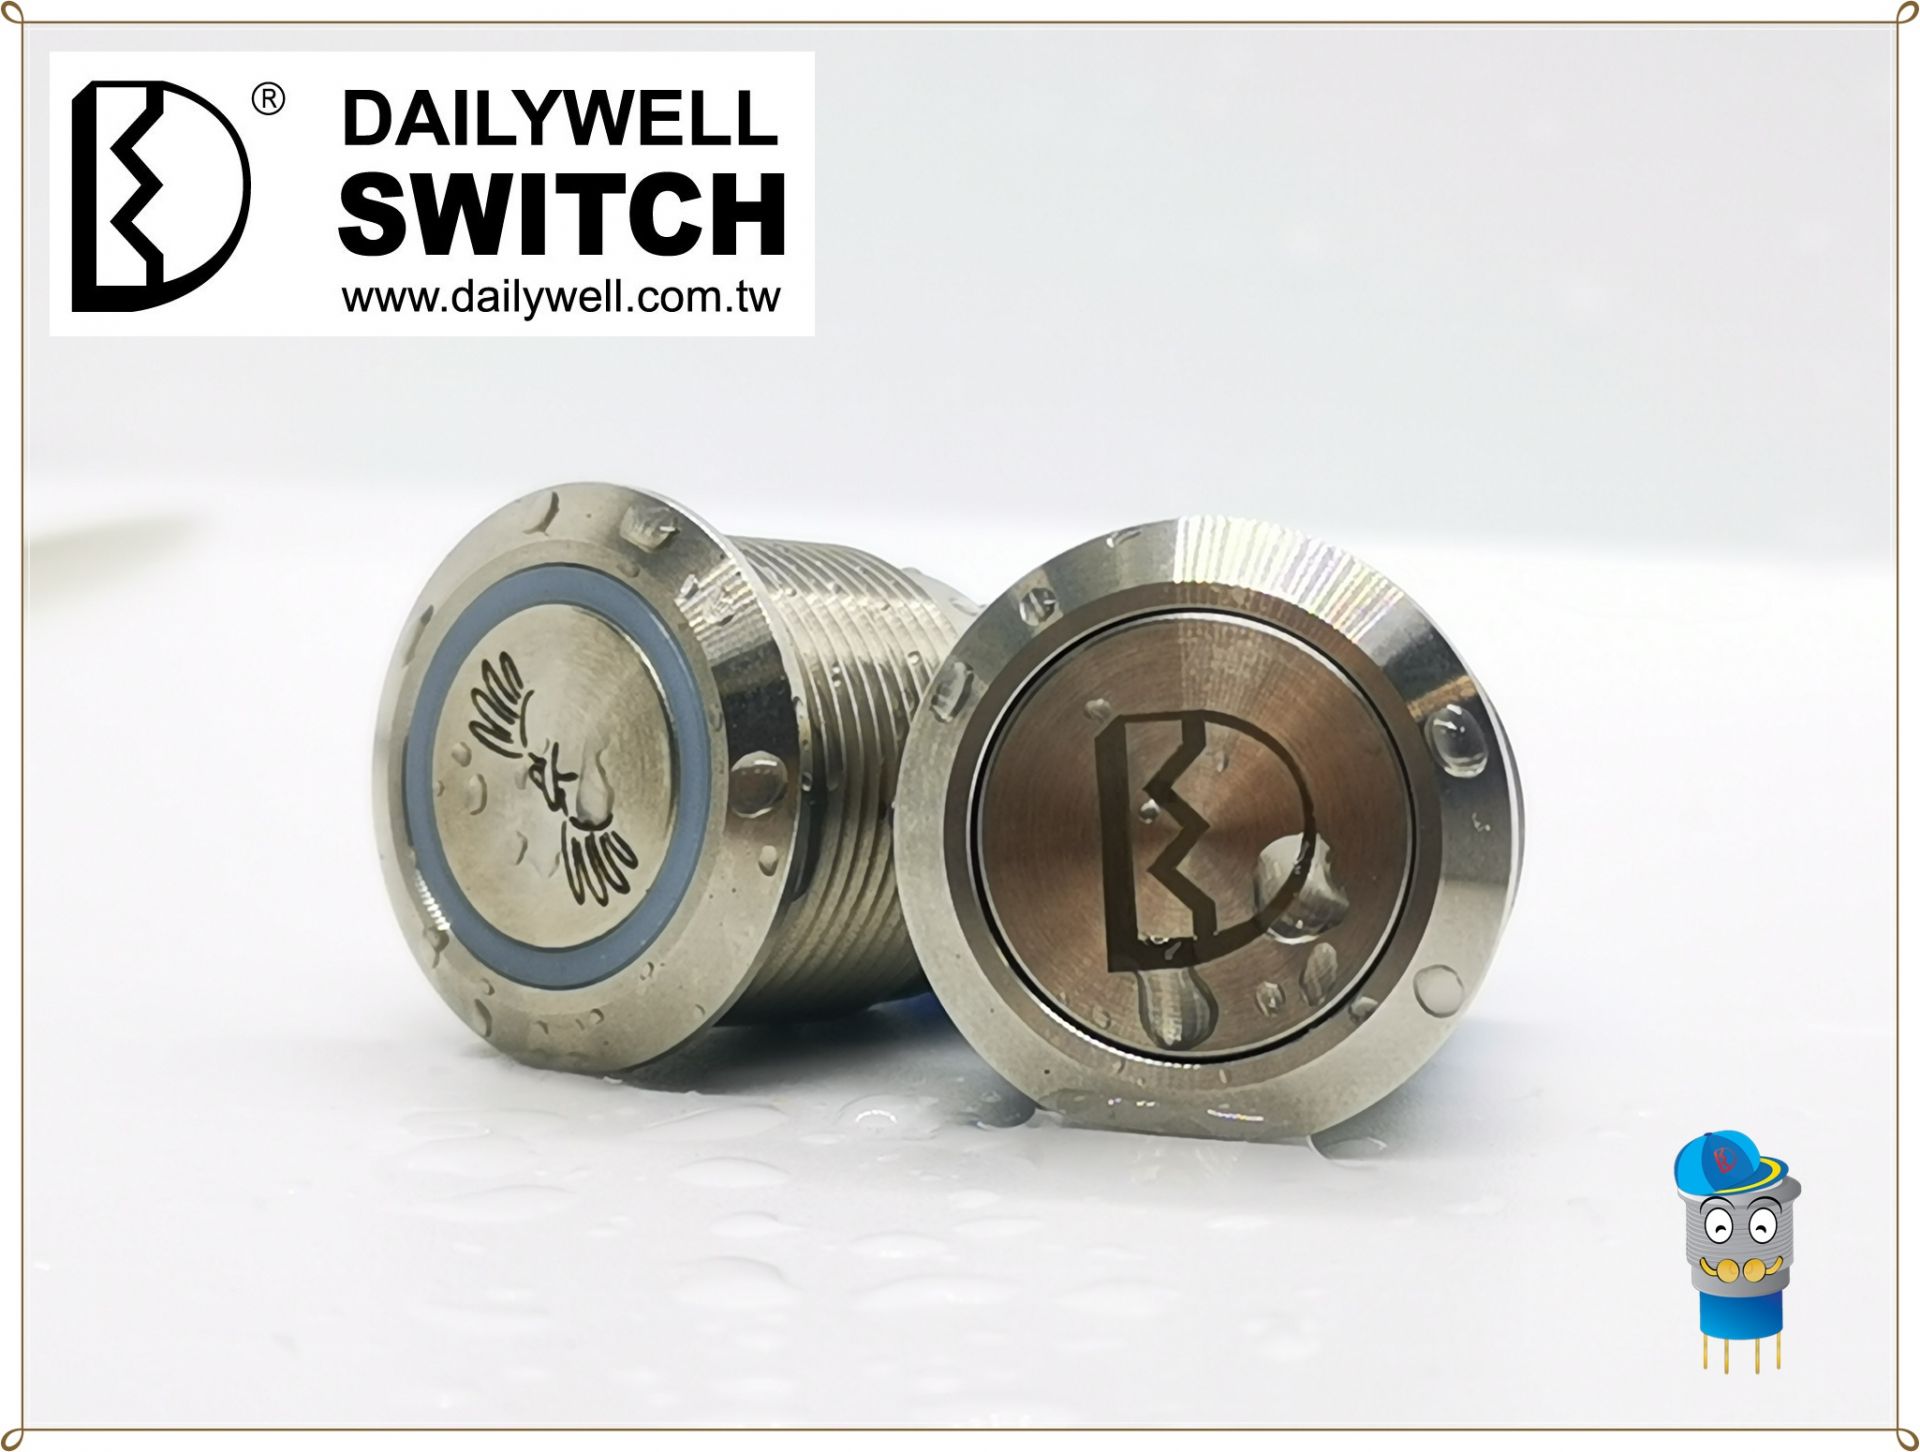 Does Dailywell have metal switches that can used in harsh environments and have higher protection levels?